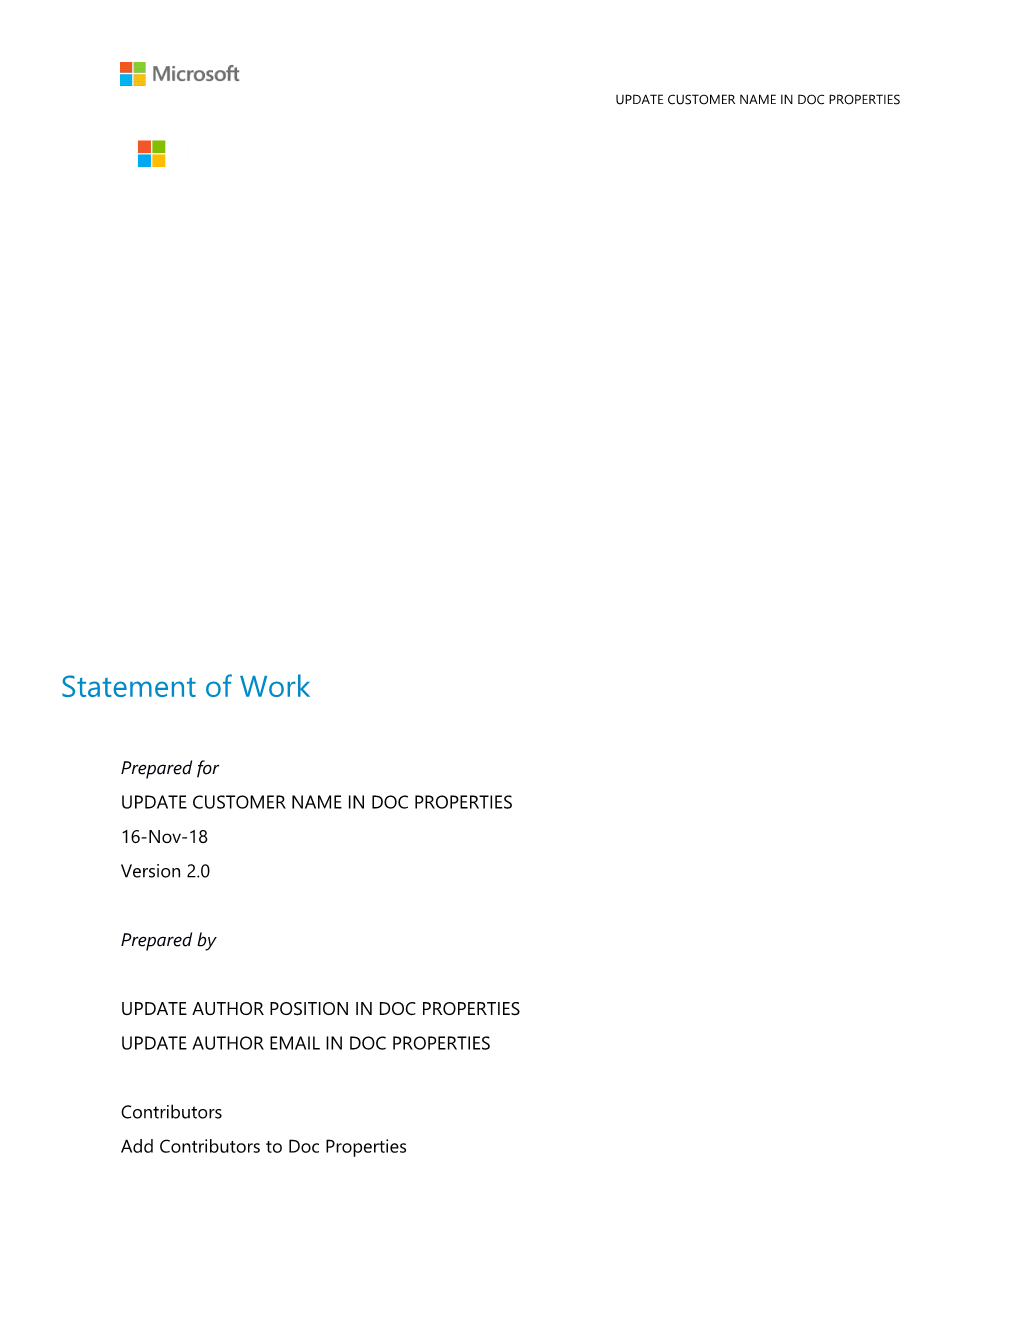 Hybrid Cloud Foundation - Statement of Work - Template